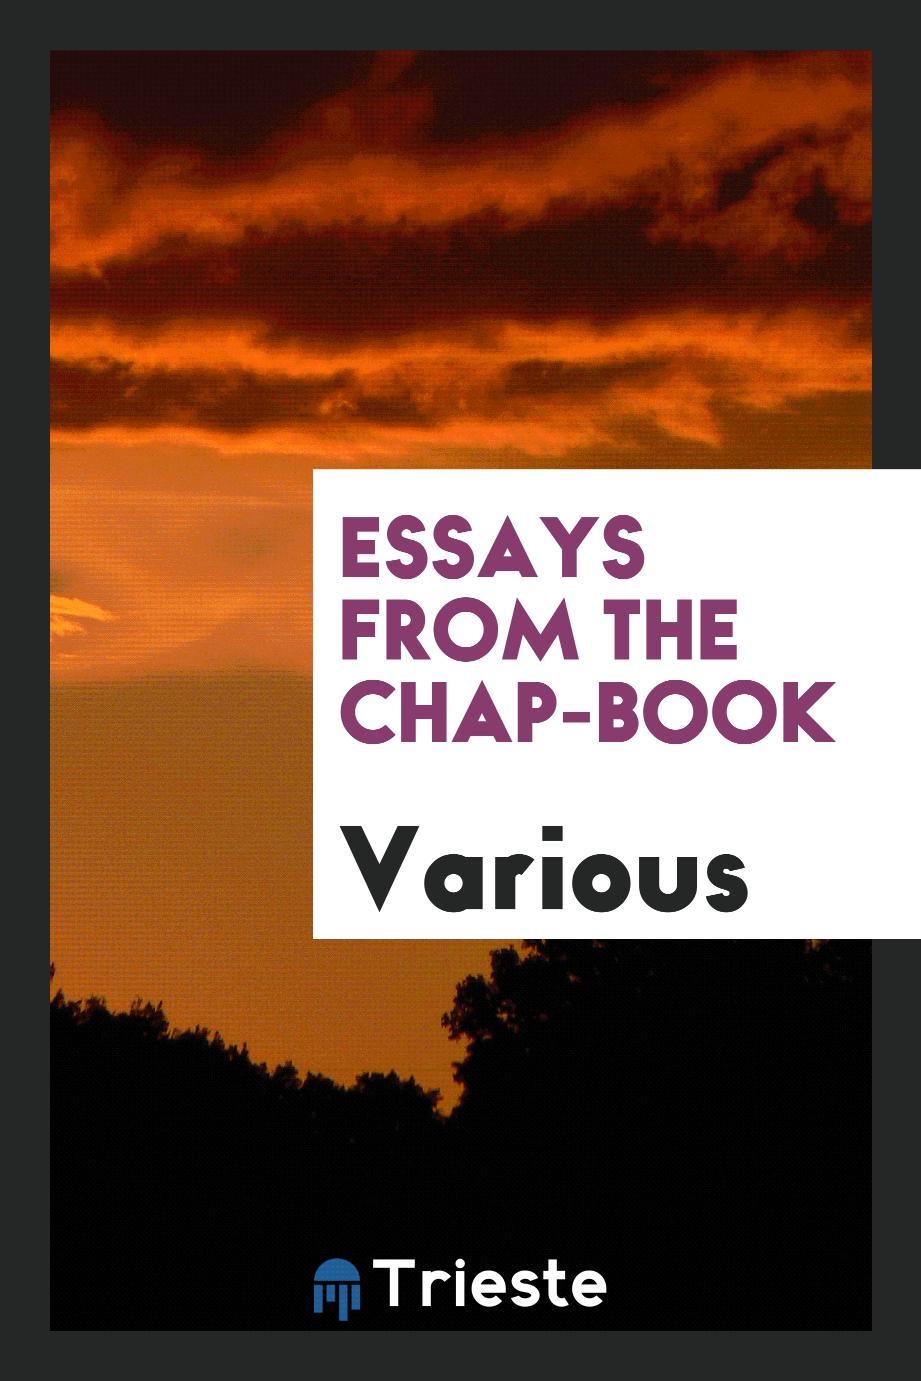 Essays from the Chap-book